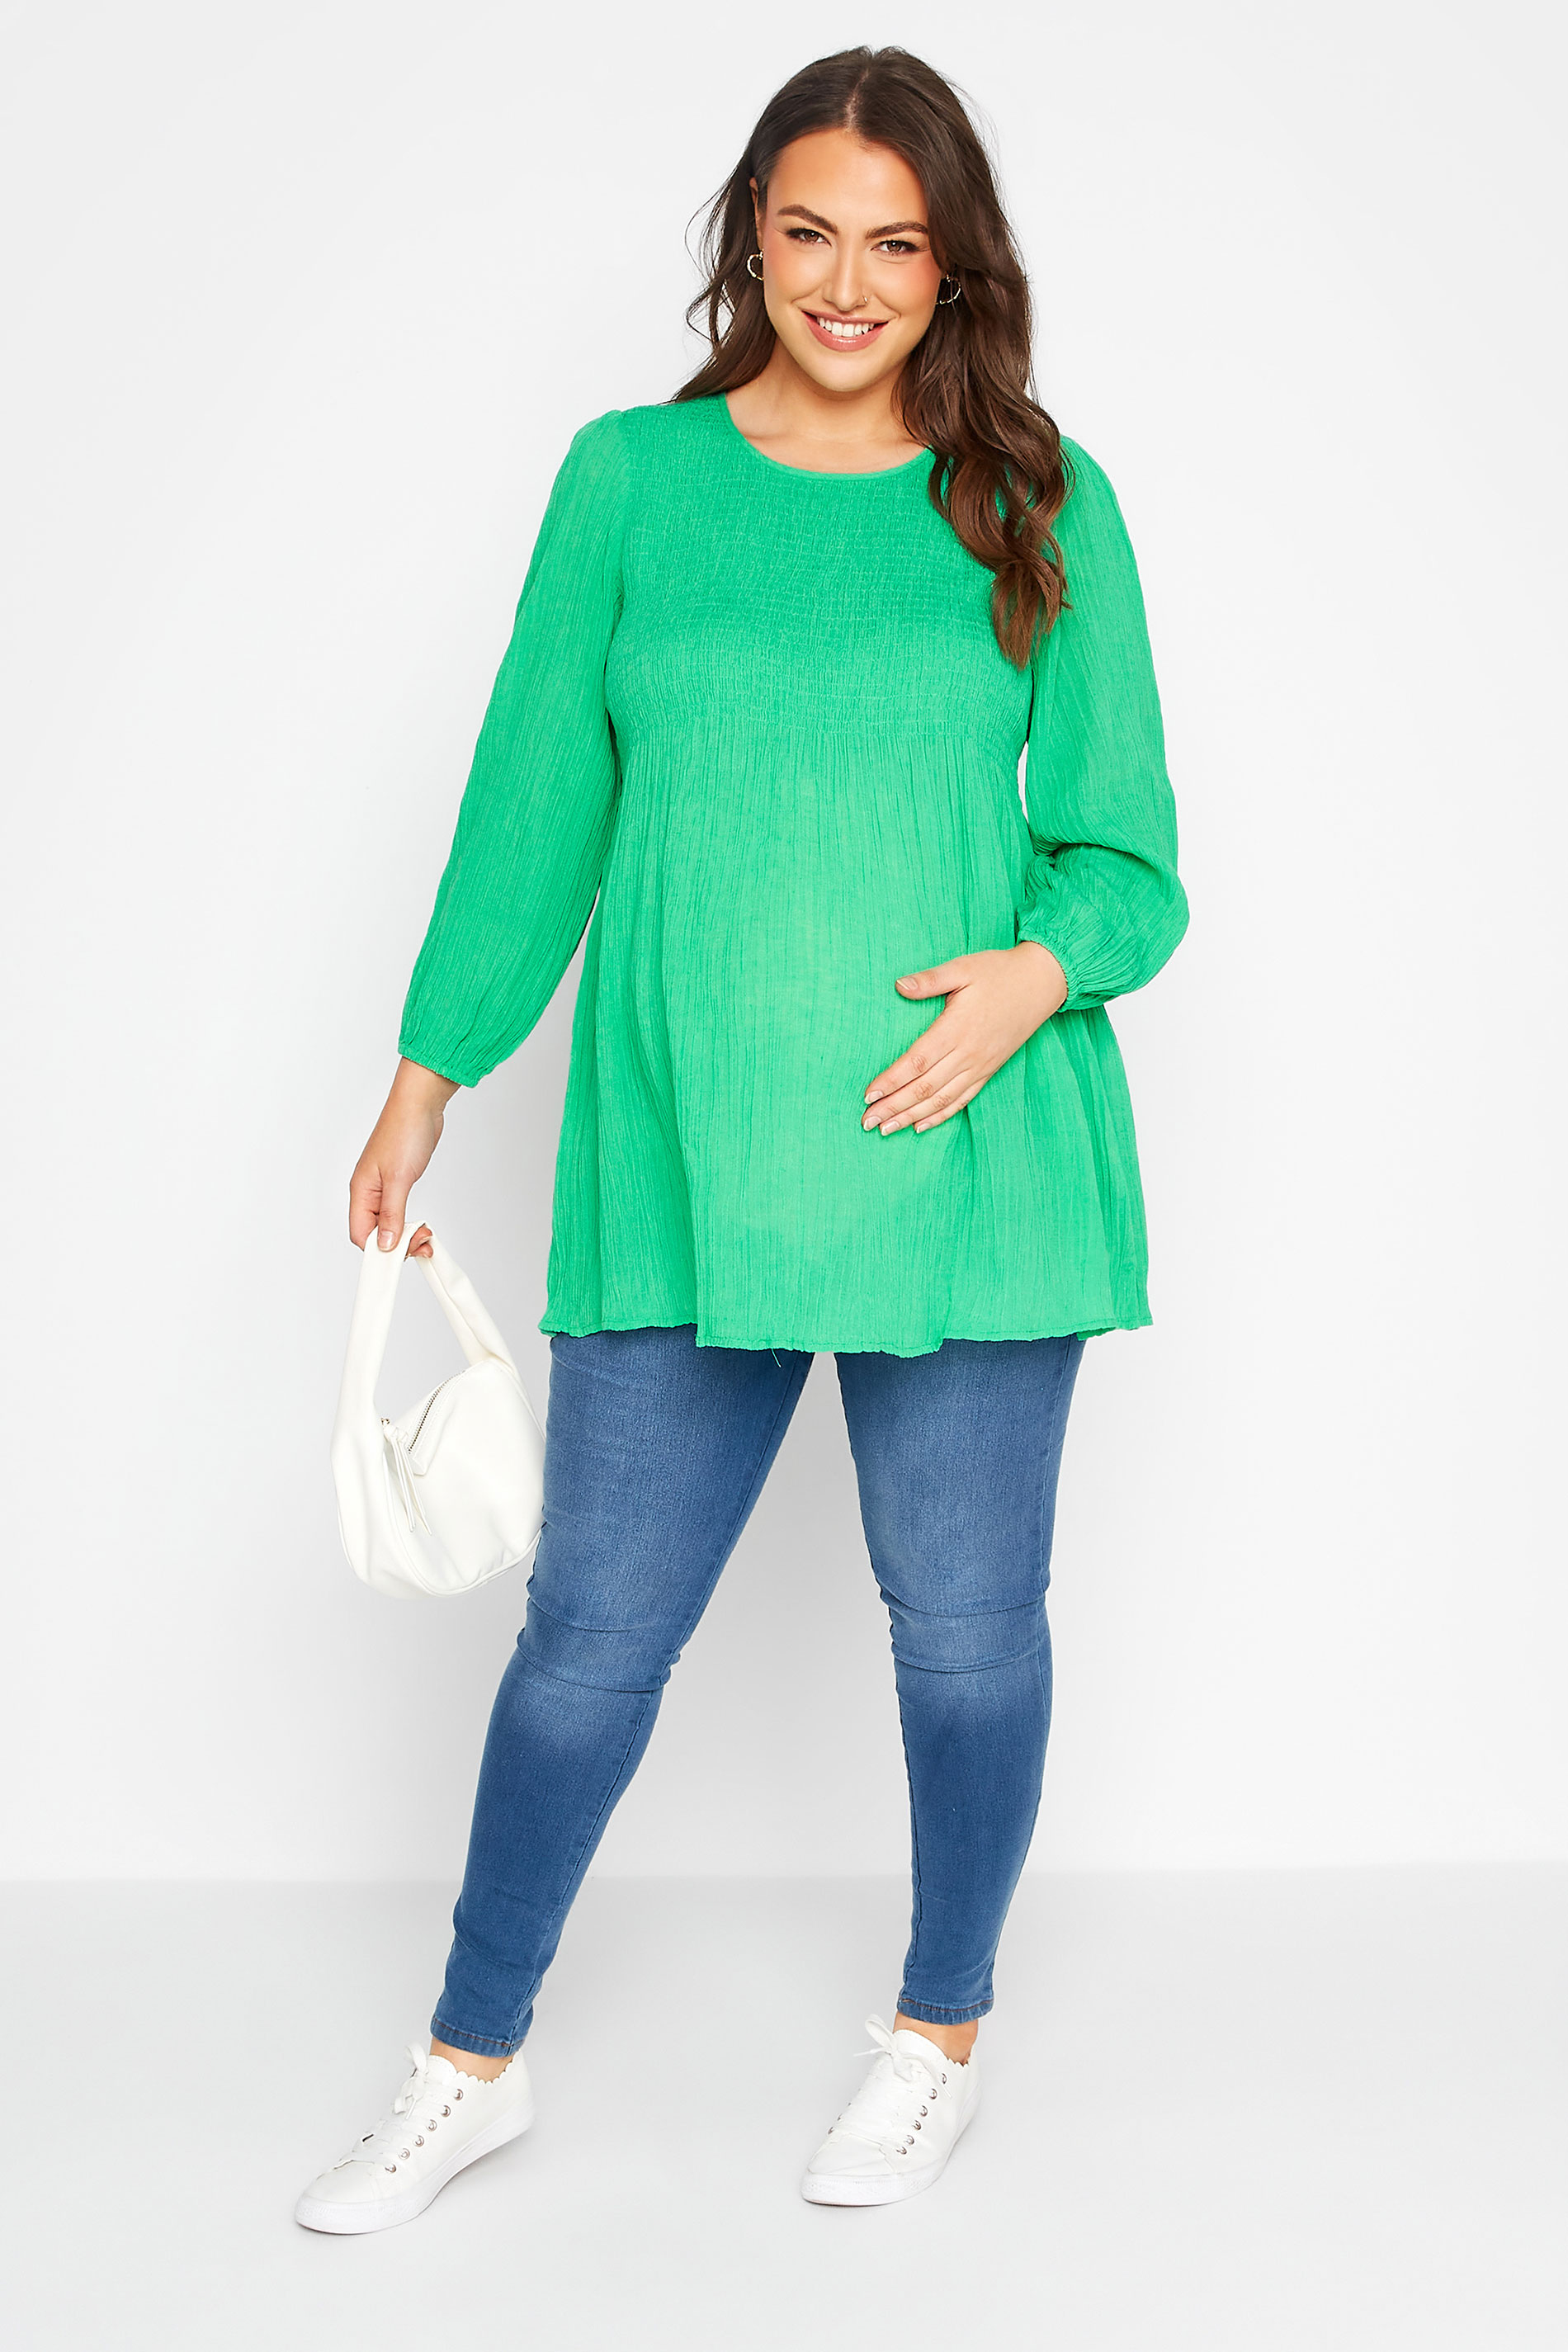 Grande taille  Tops Grande taille  Tops dÉté | BUMP IT UP MATERNITY Curve Green Shirred Top - VN50038